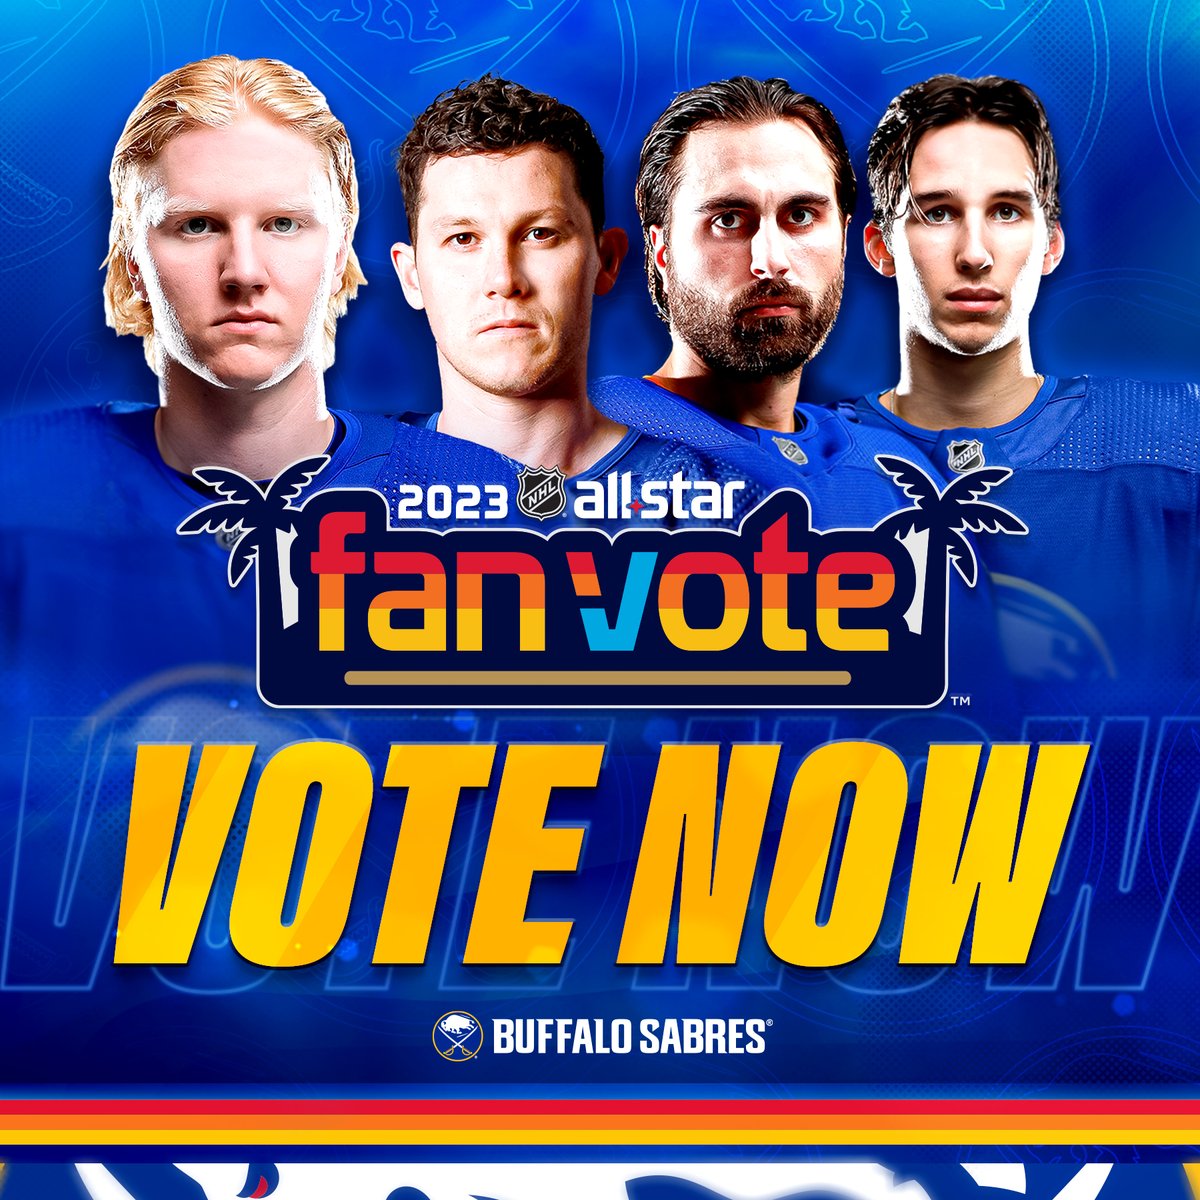 Your tweets count as votes for #NHLAllStar! Retweet this tweet or use the format below in your own tweet to get your votes in... #NHLAllStarVote Rasmus Dahlin #NHLAllStarVote Jeff Skinner #NHLAllStarVote Alex Tuch #NHLAllStarVote Dylan Cozens LET'S DO THIS, BUFFALO‼️